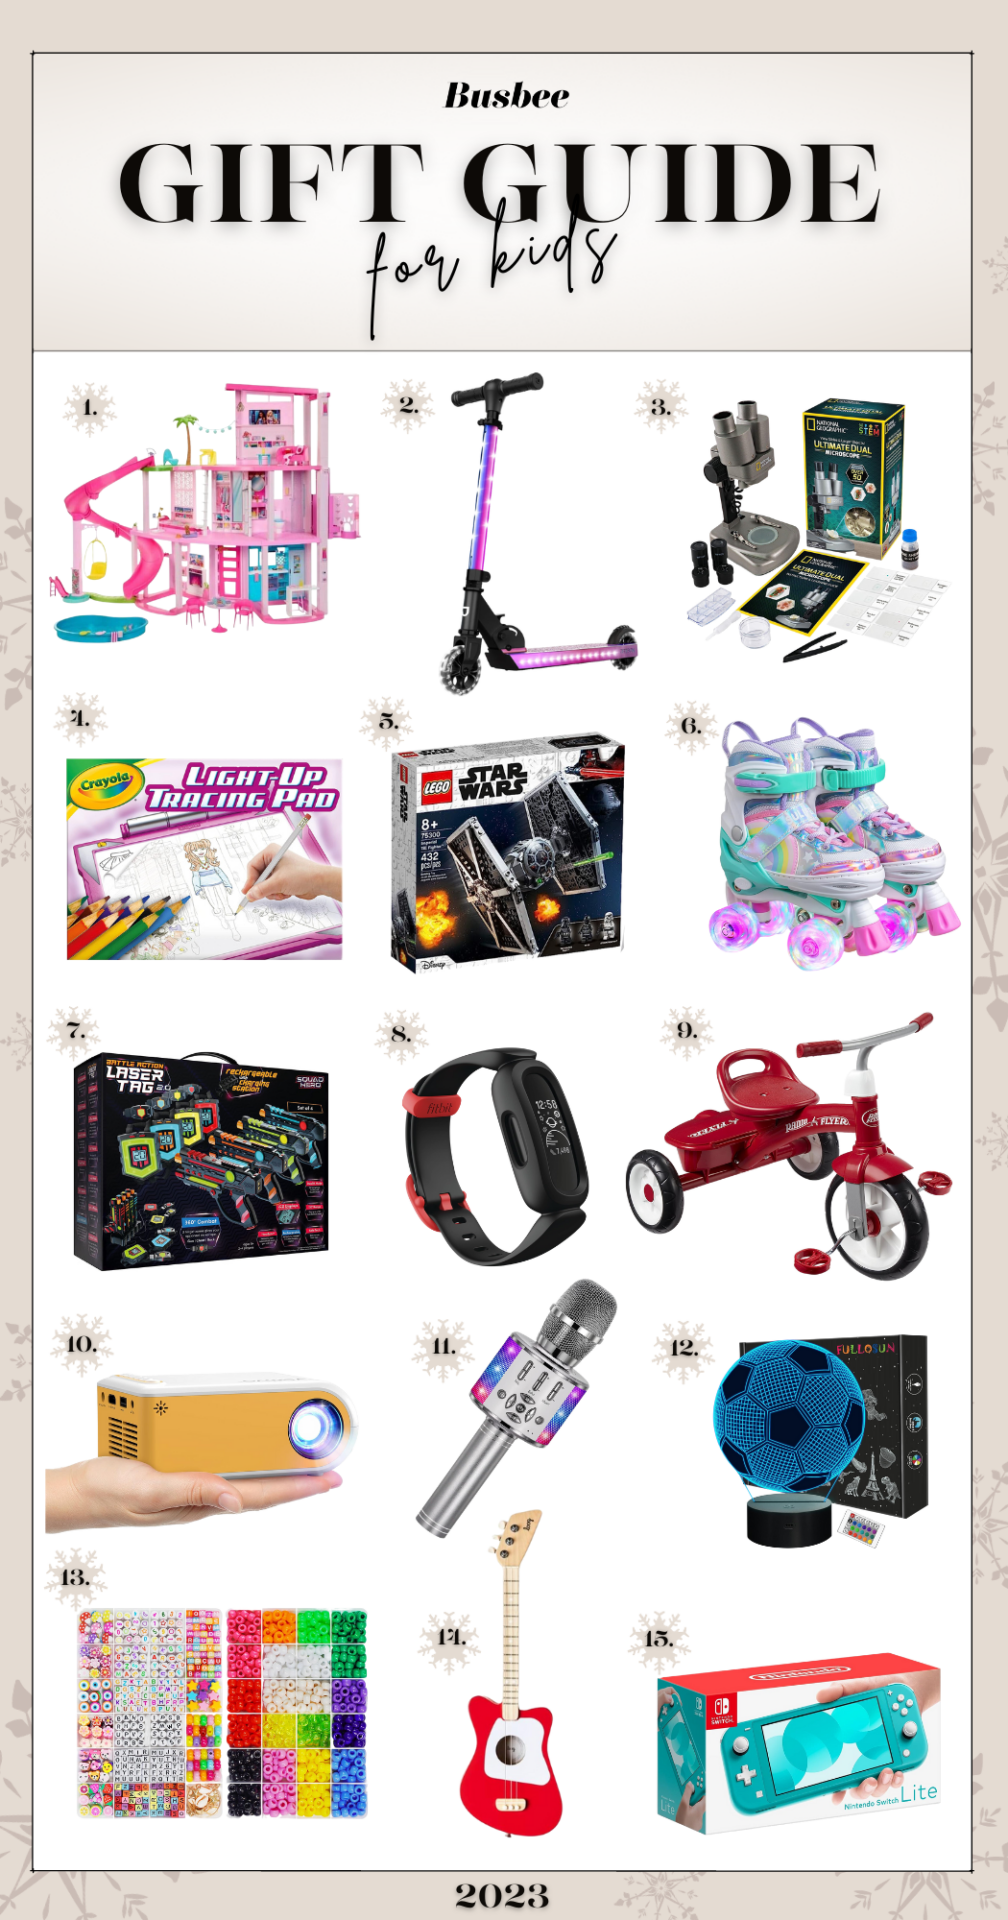 Gifts For The Kids: Hottest Holiday Toys